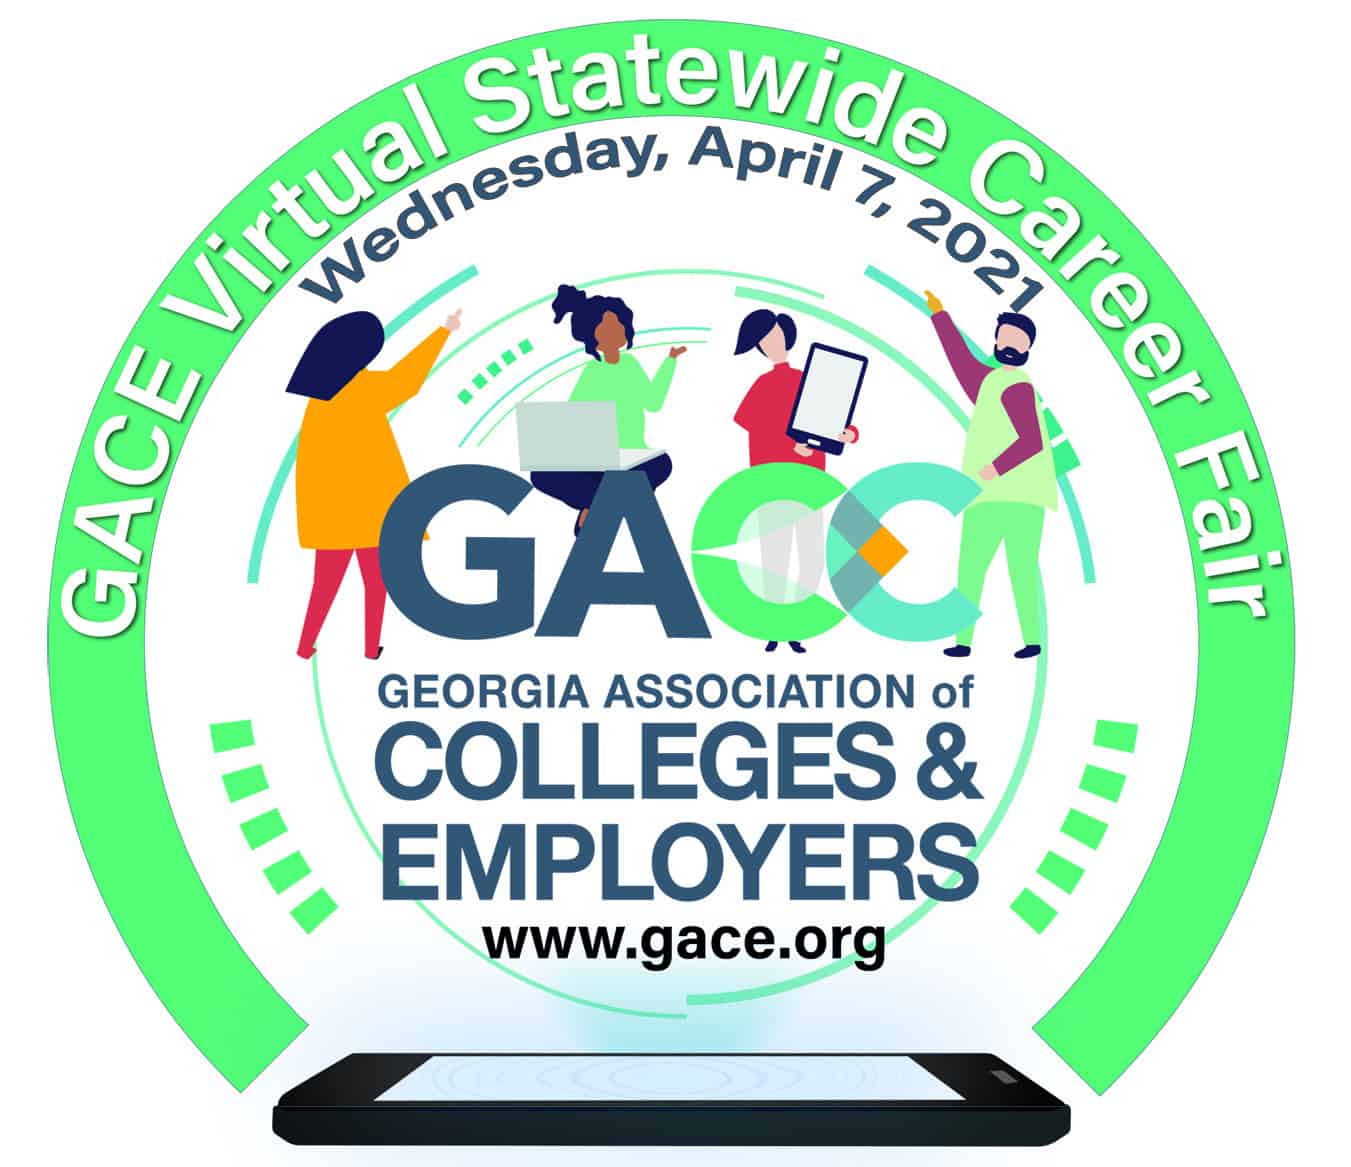 GACE virtual statewide career fair set for April 7th.